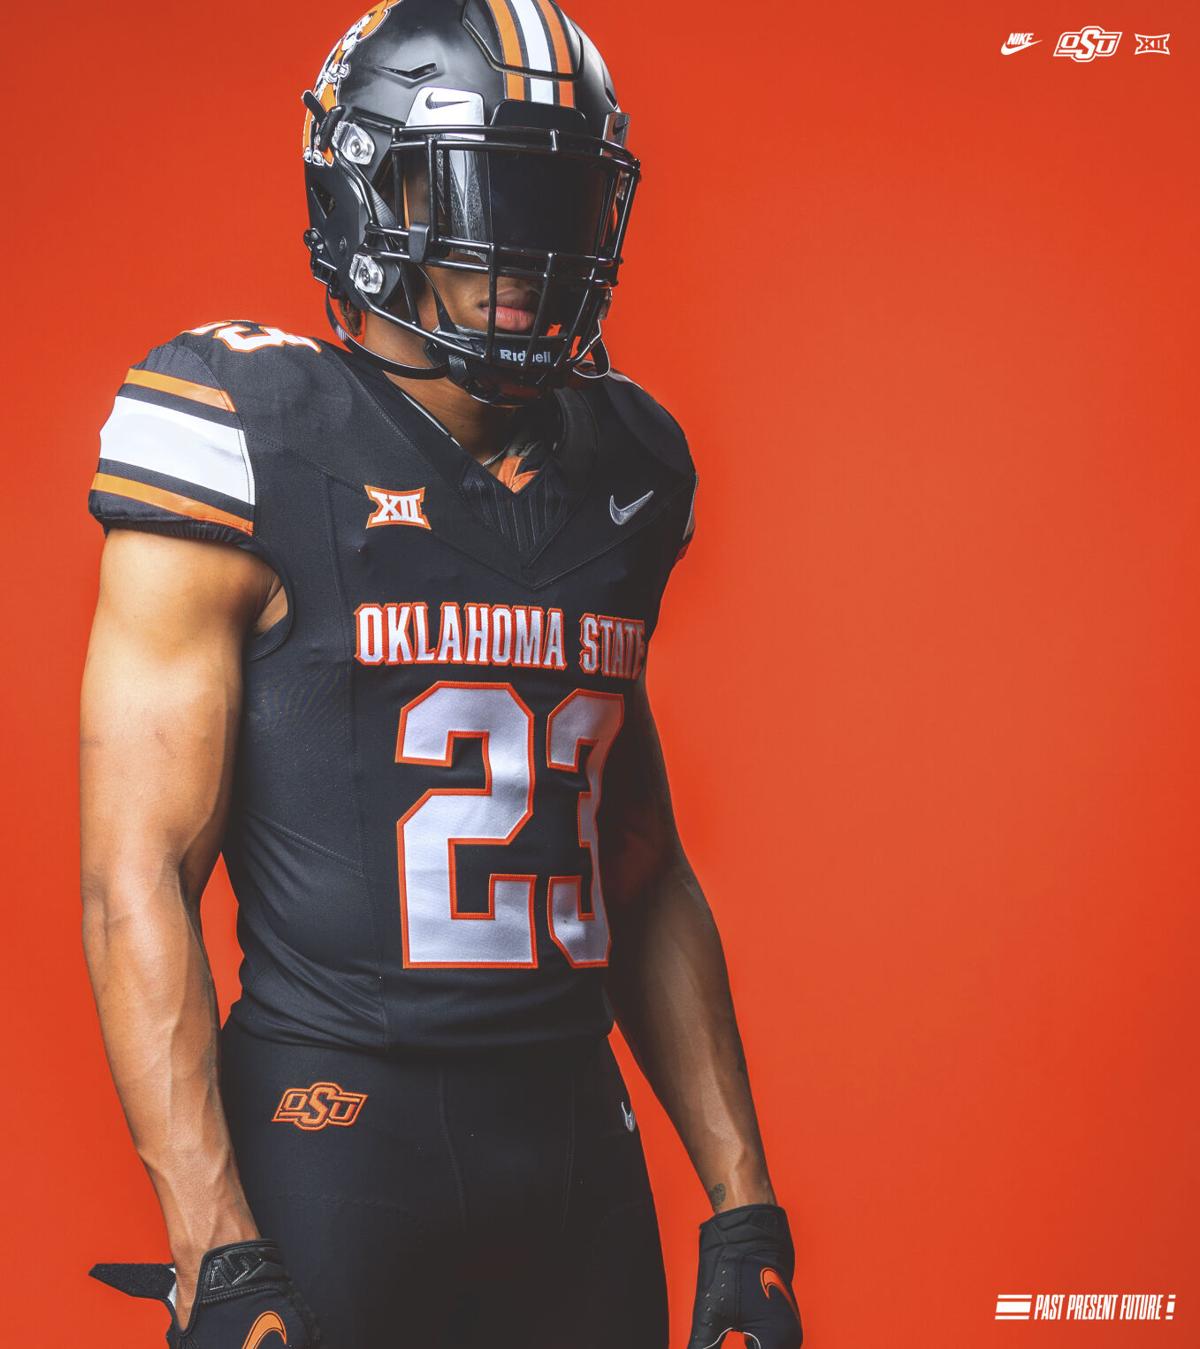 With inspiration from the past, OSU unveils new uniforms for the